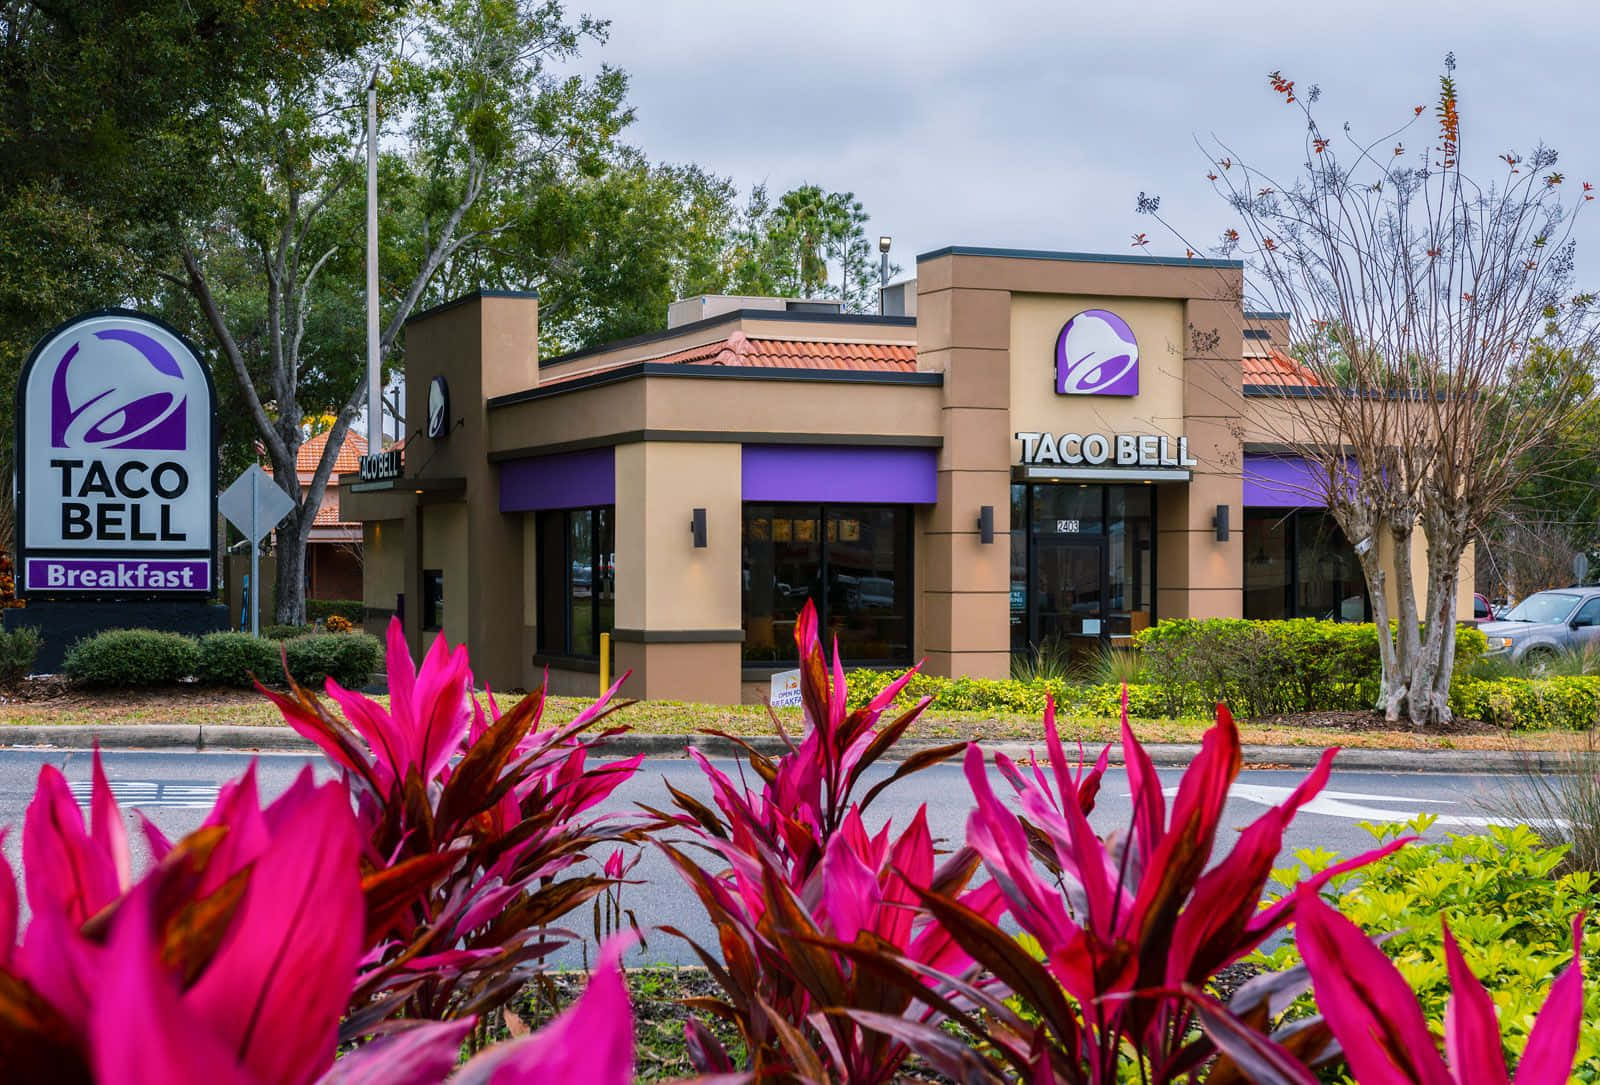 Enjoy delicious Mexican-style eats at Taco Bell